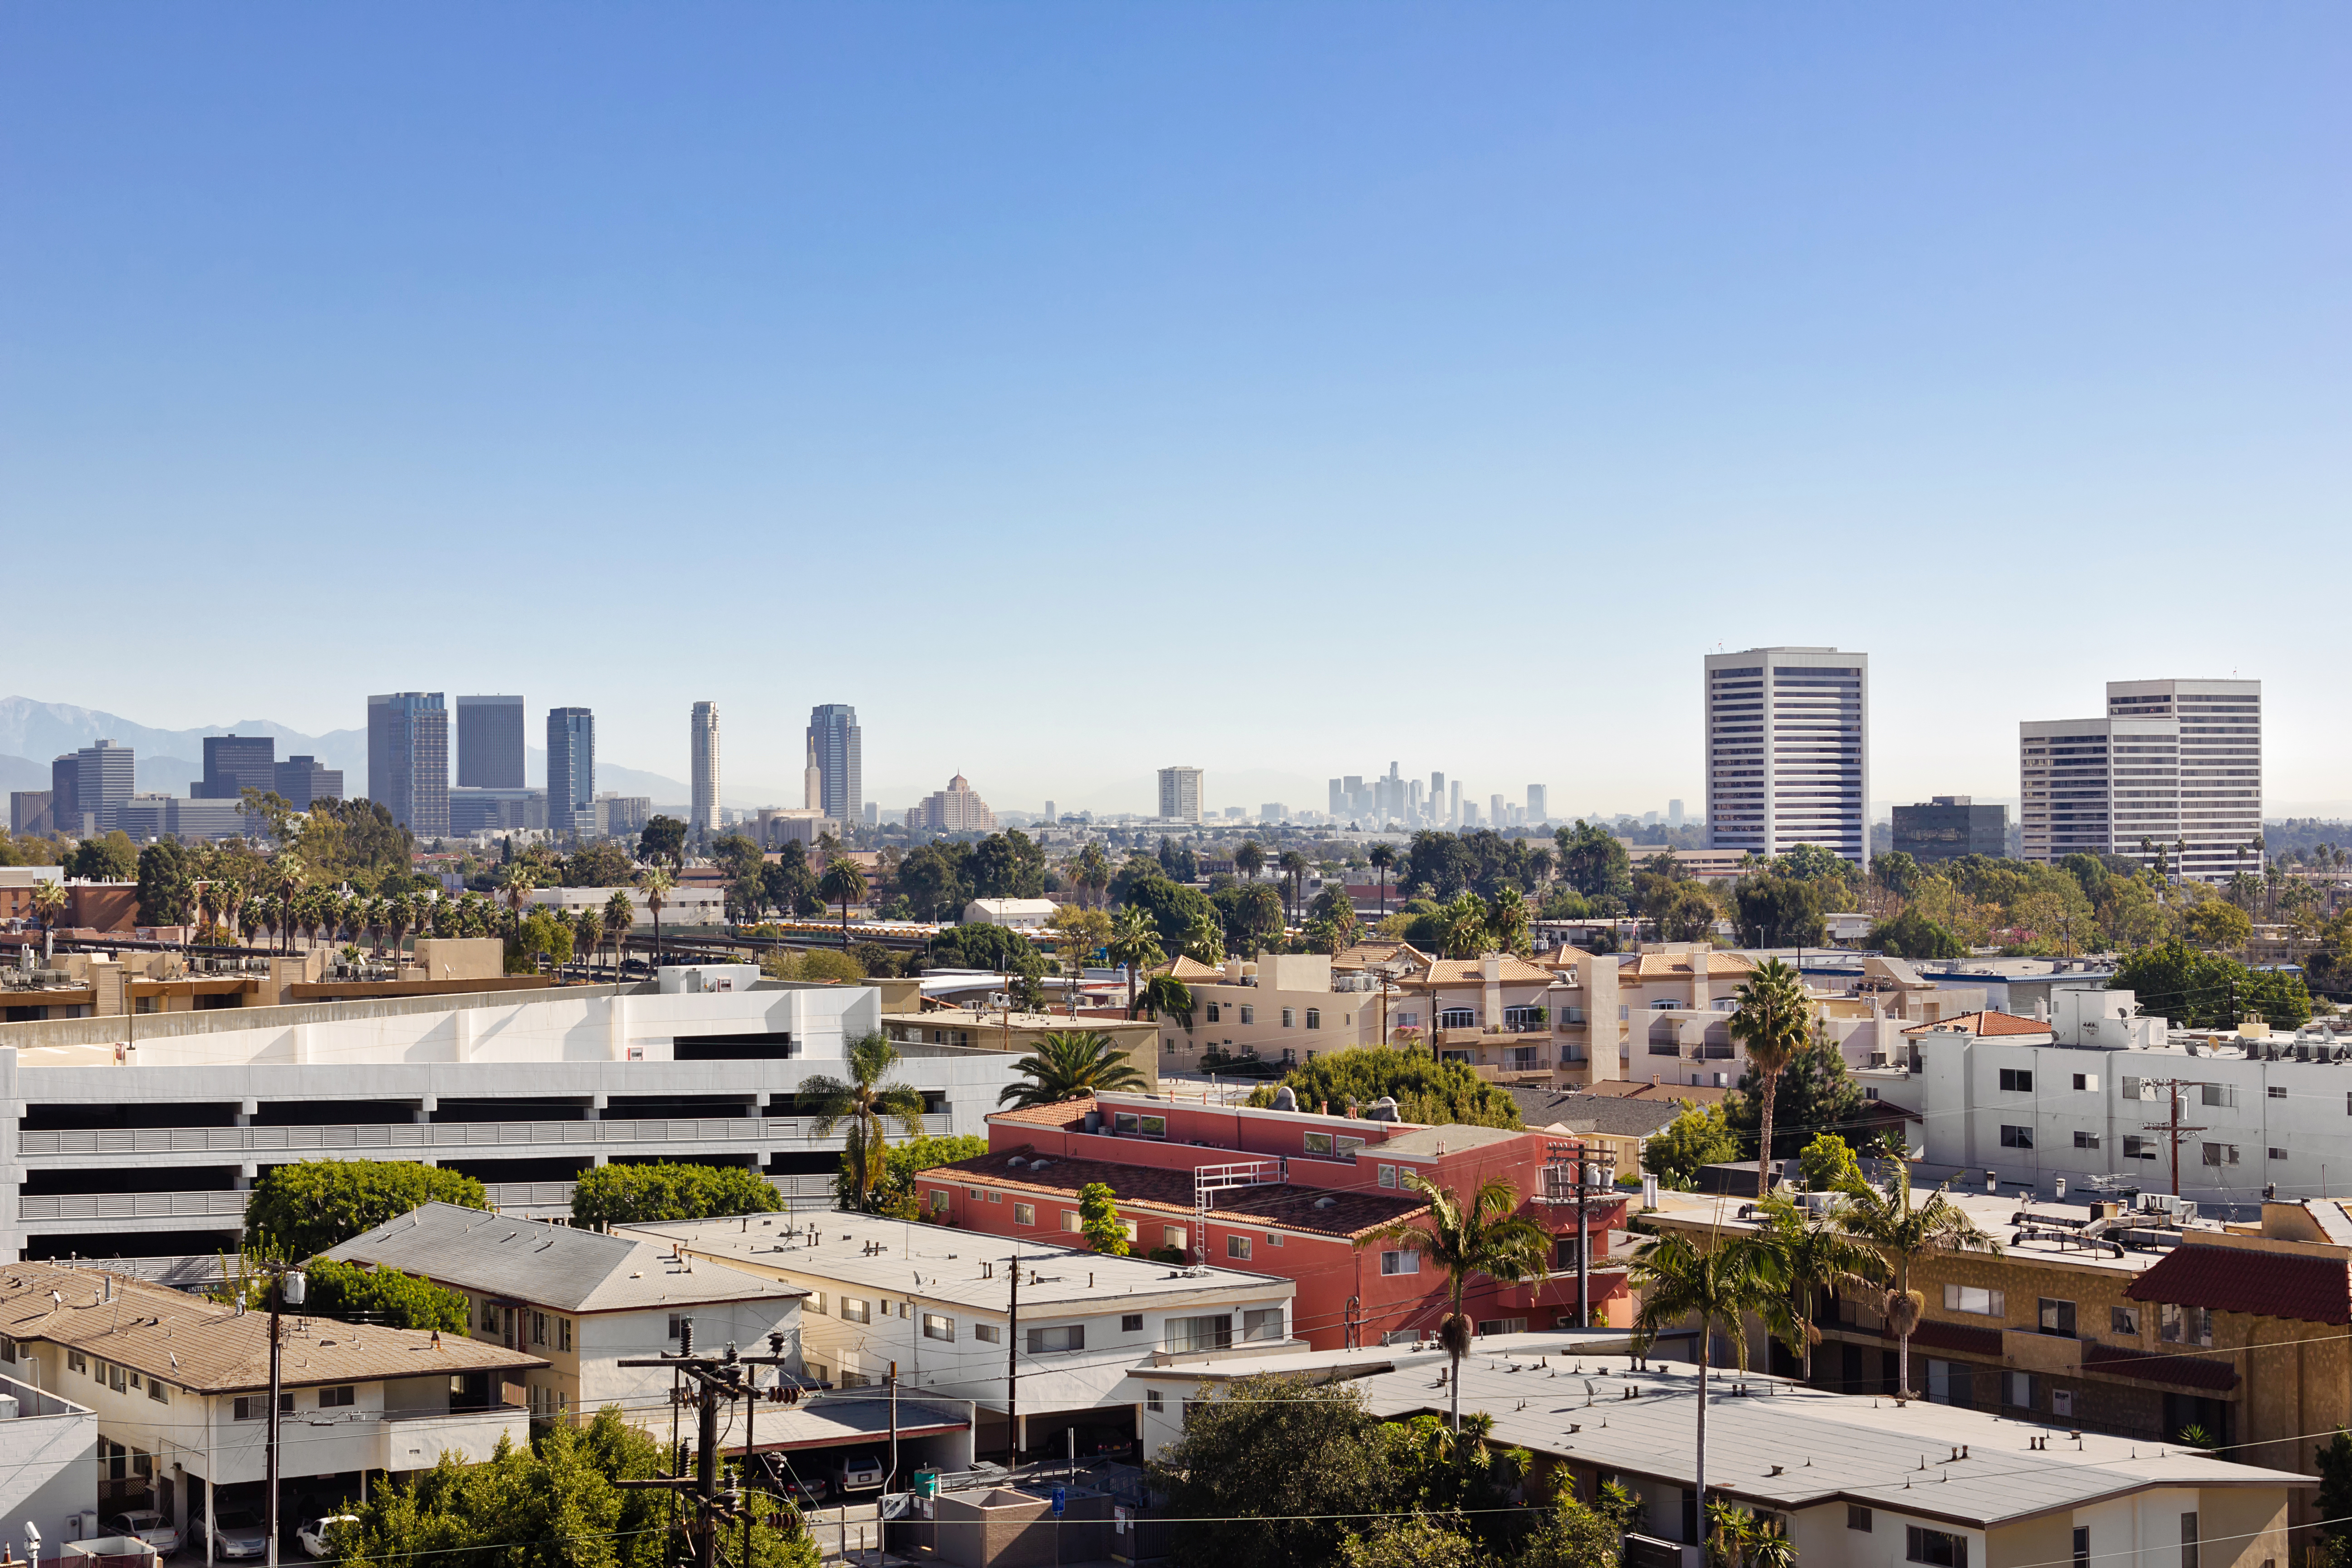 View of apartments in Los Angeles